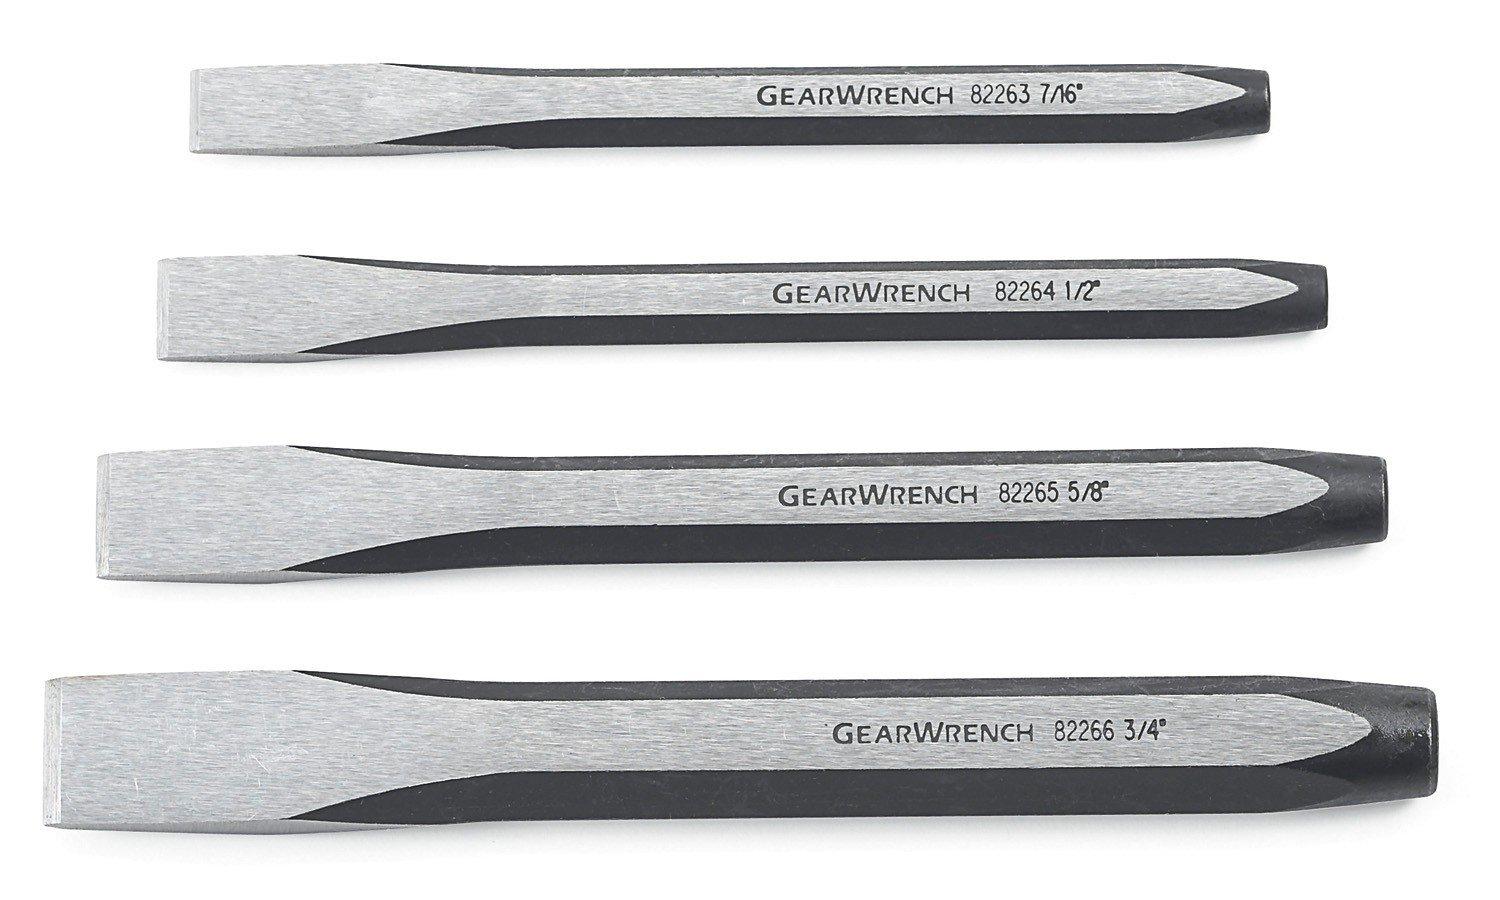 GearWrench 82203C 4 Piece Pitbull Dual Material Mixed Plier Set